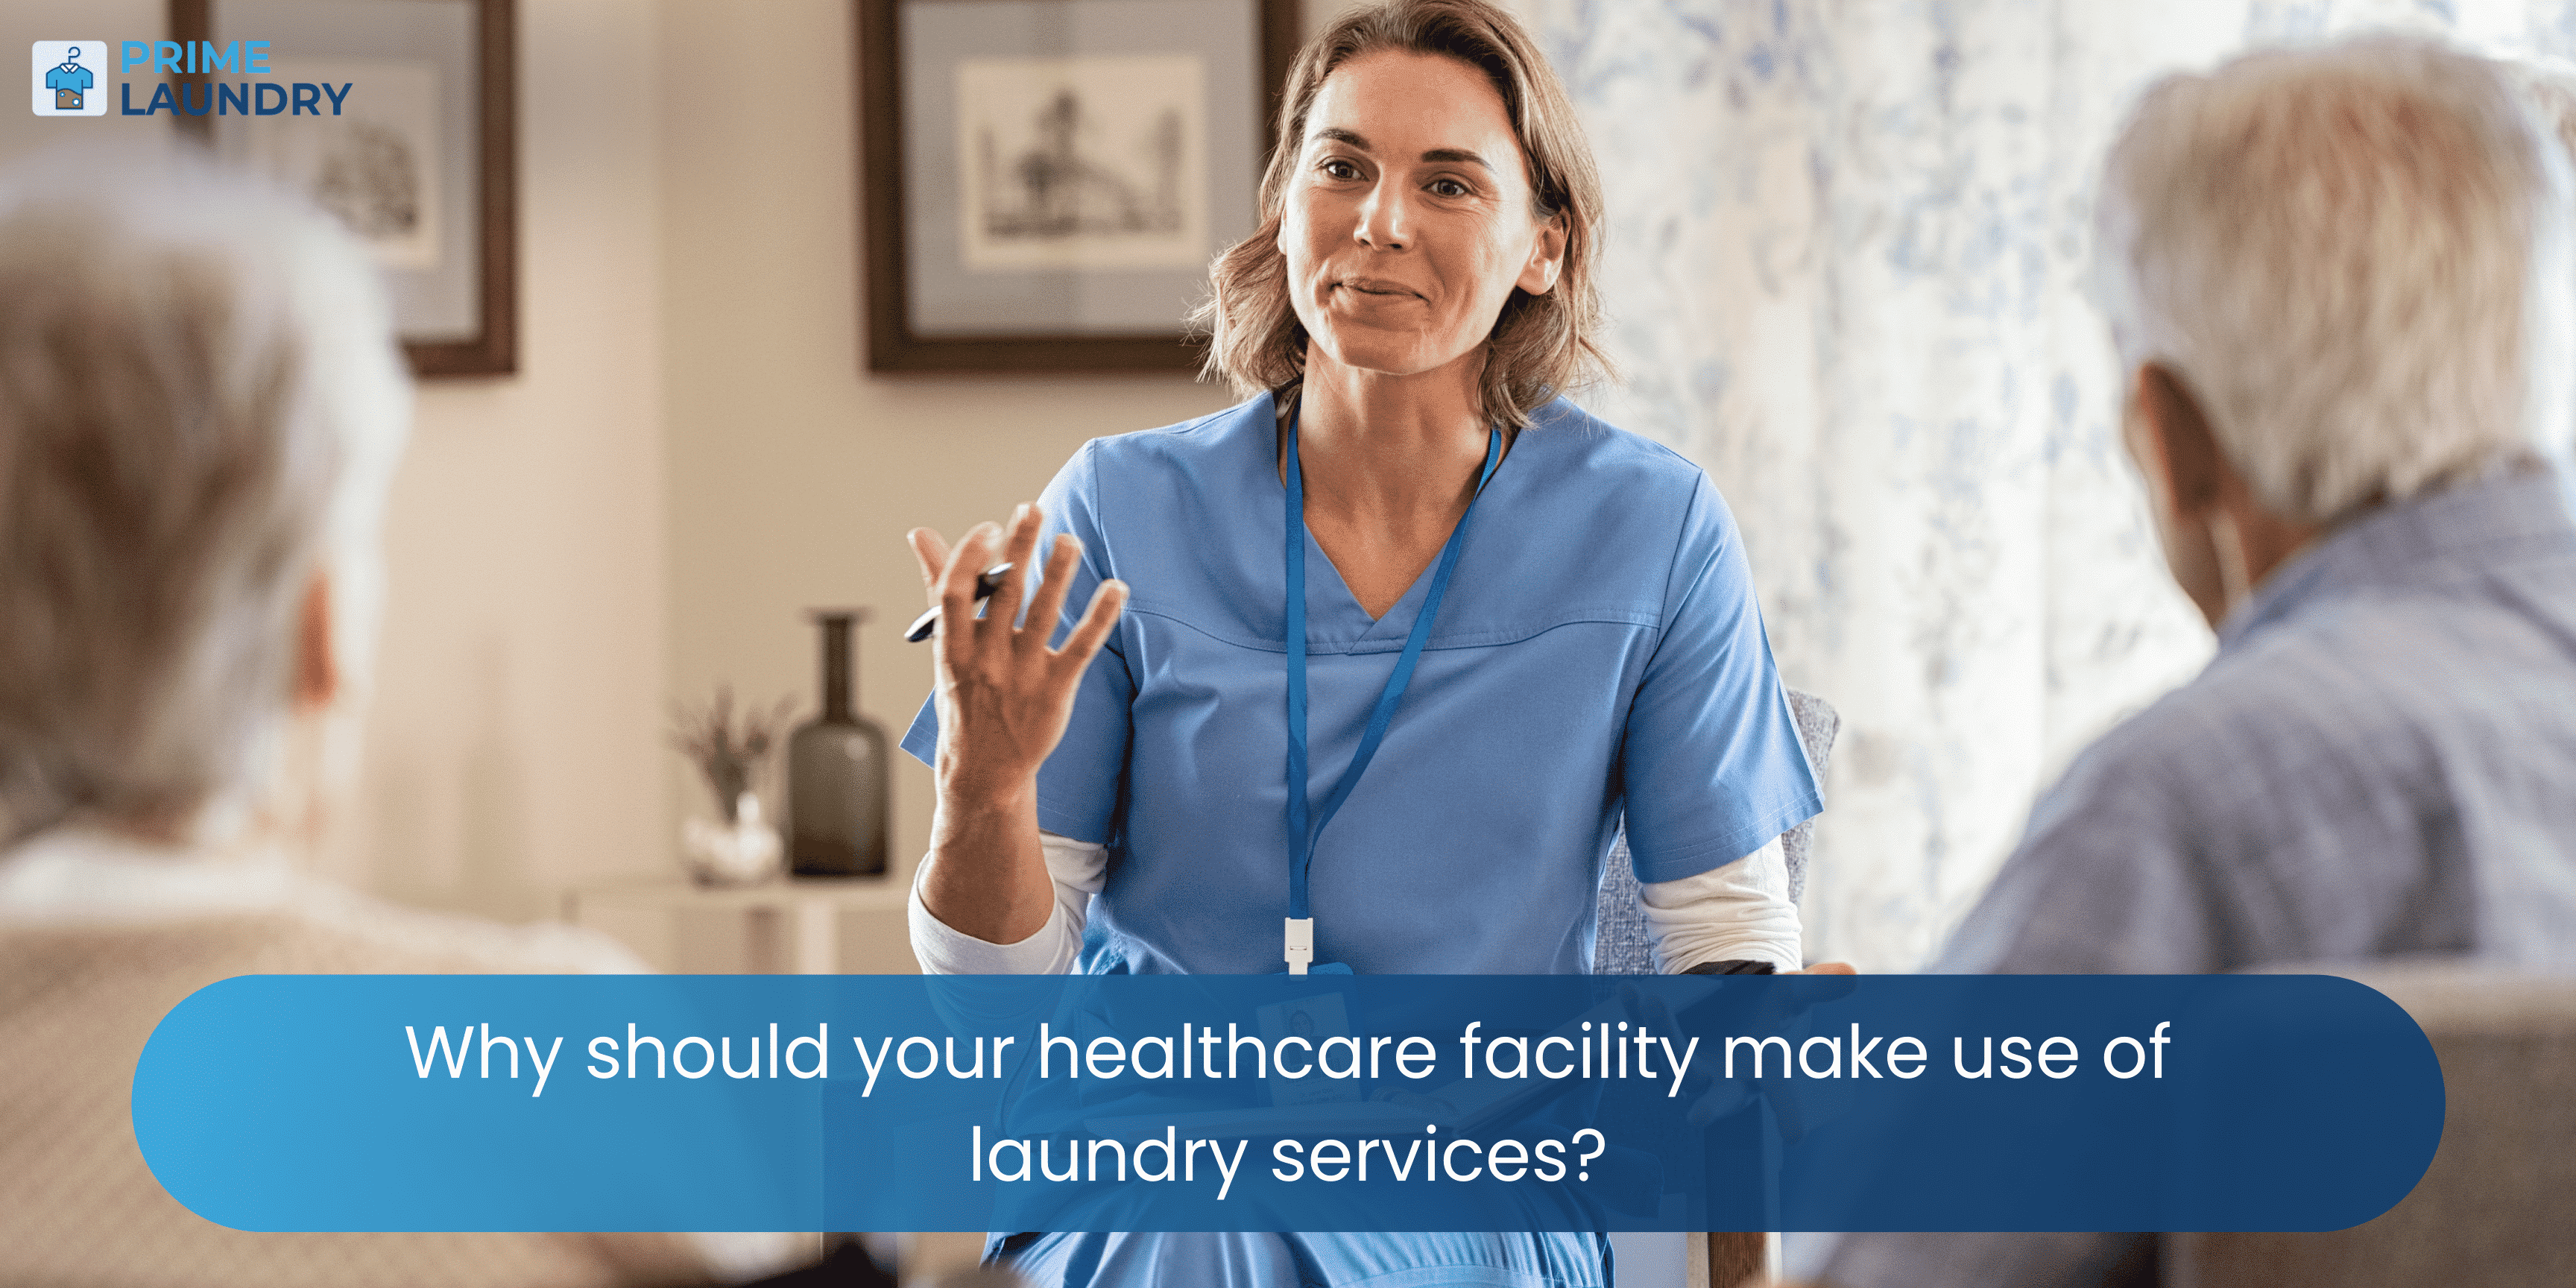 Why Should Your Healthcare Facility Make Use of Laundry Services